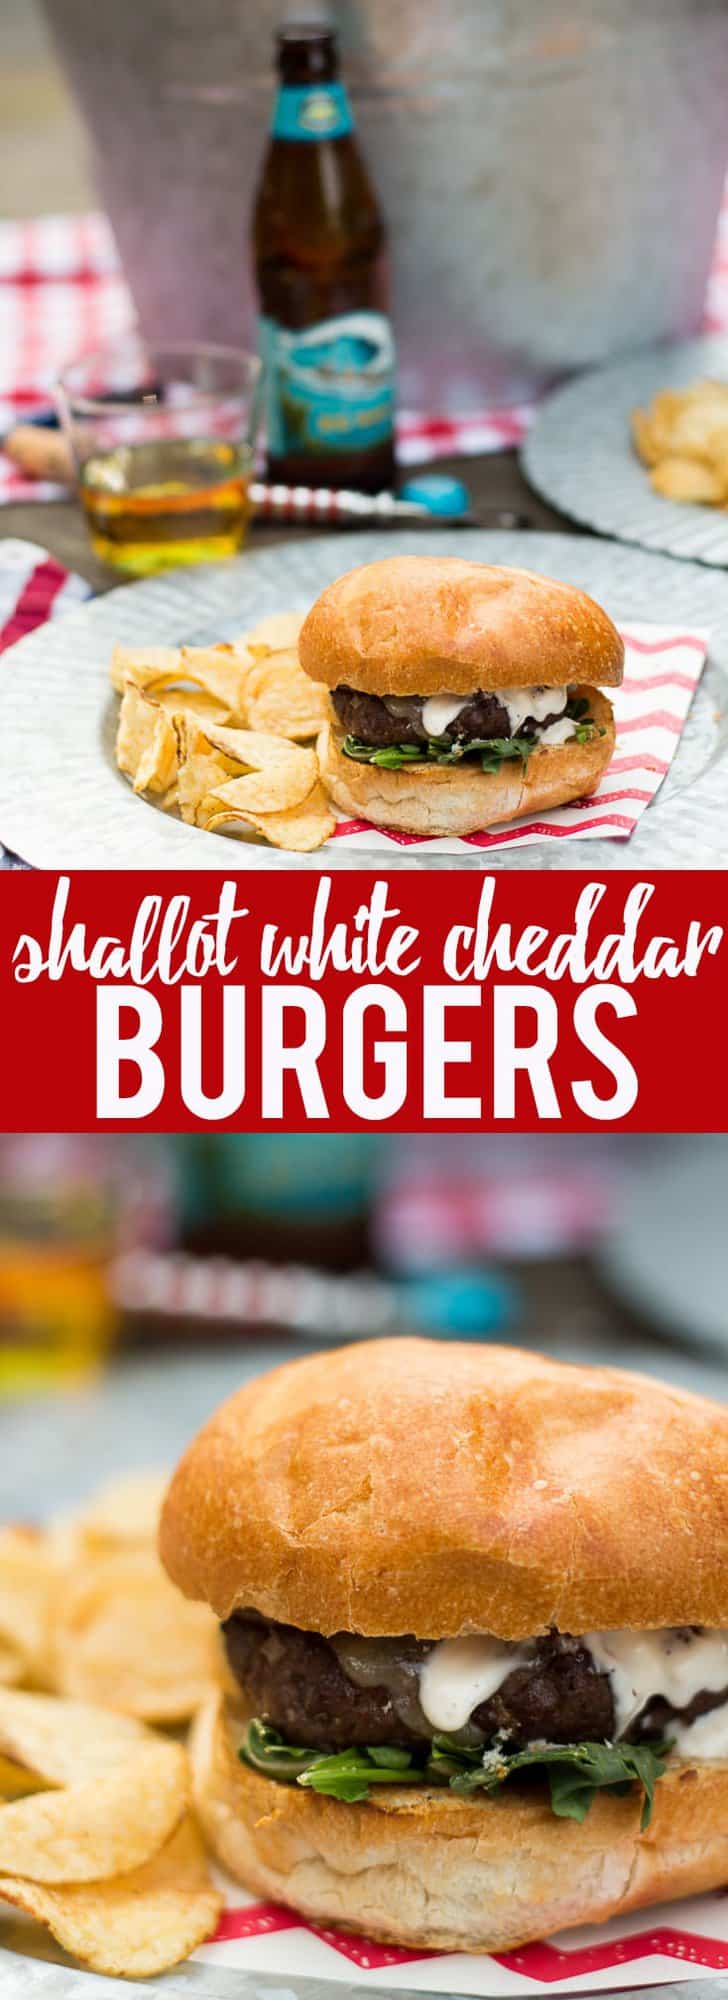 These Shallot White Cheddar Burgers use shallots to flavor the burger, and are topped with white cheddar and a garlic aioli for a flavor bomb gourmet burger!